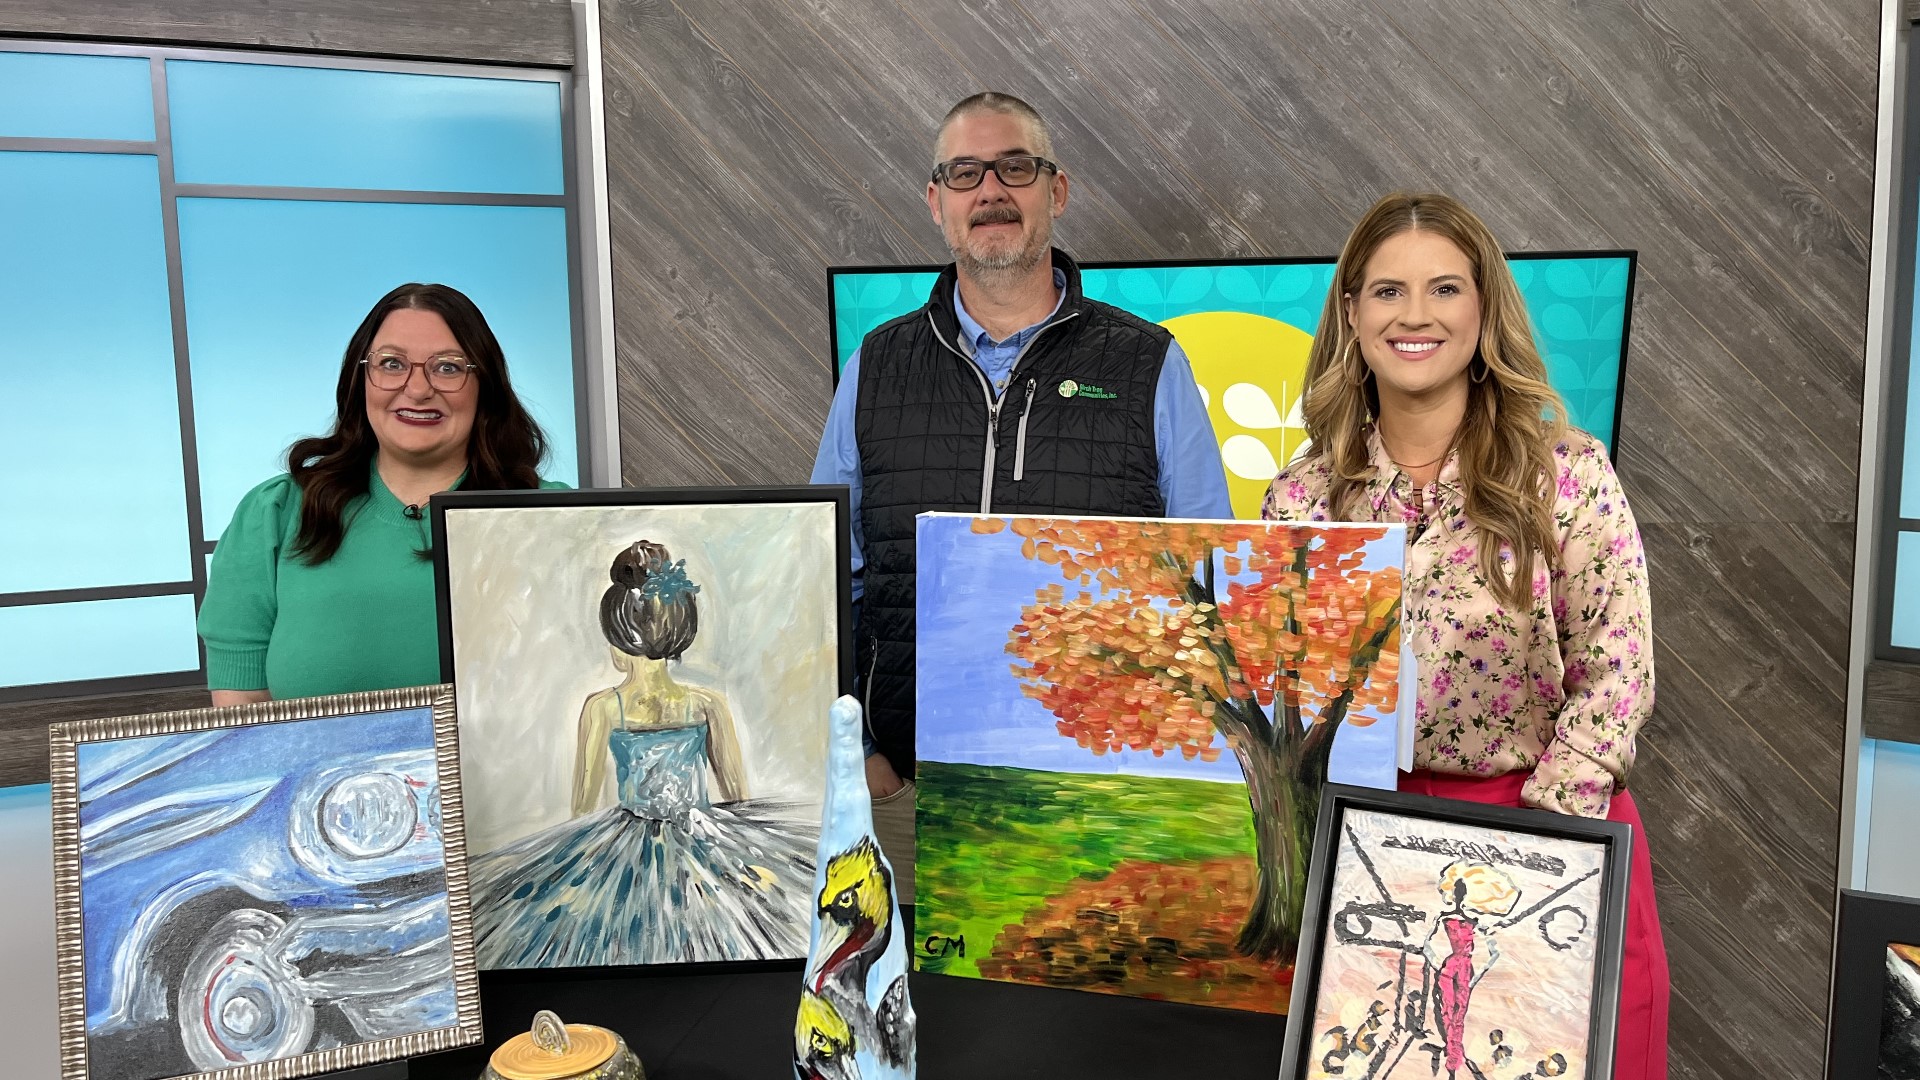 Adults dealing with mental illness express themselves with art as a medium at the 18th Annual Birch Tree Communities Expressions Art Show happening on April 18th.